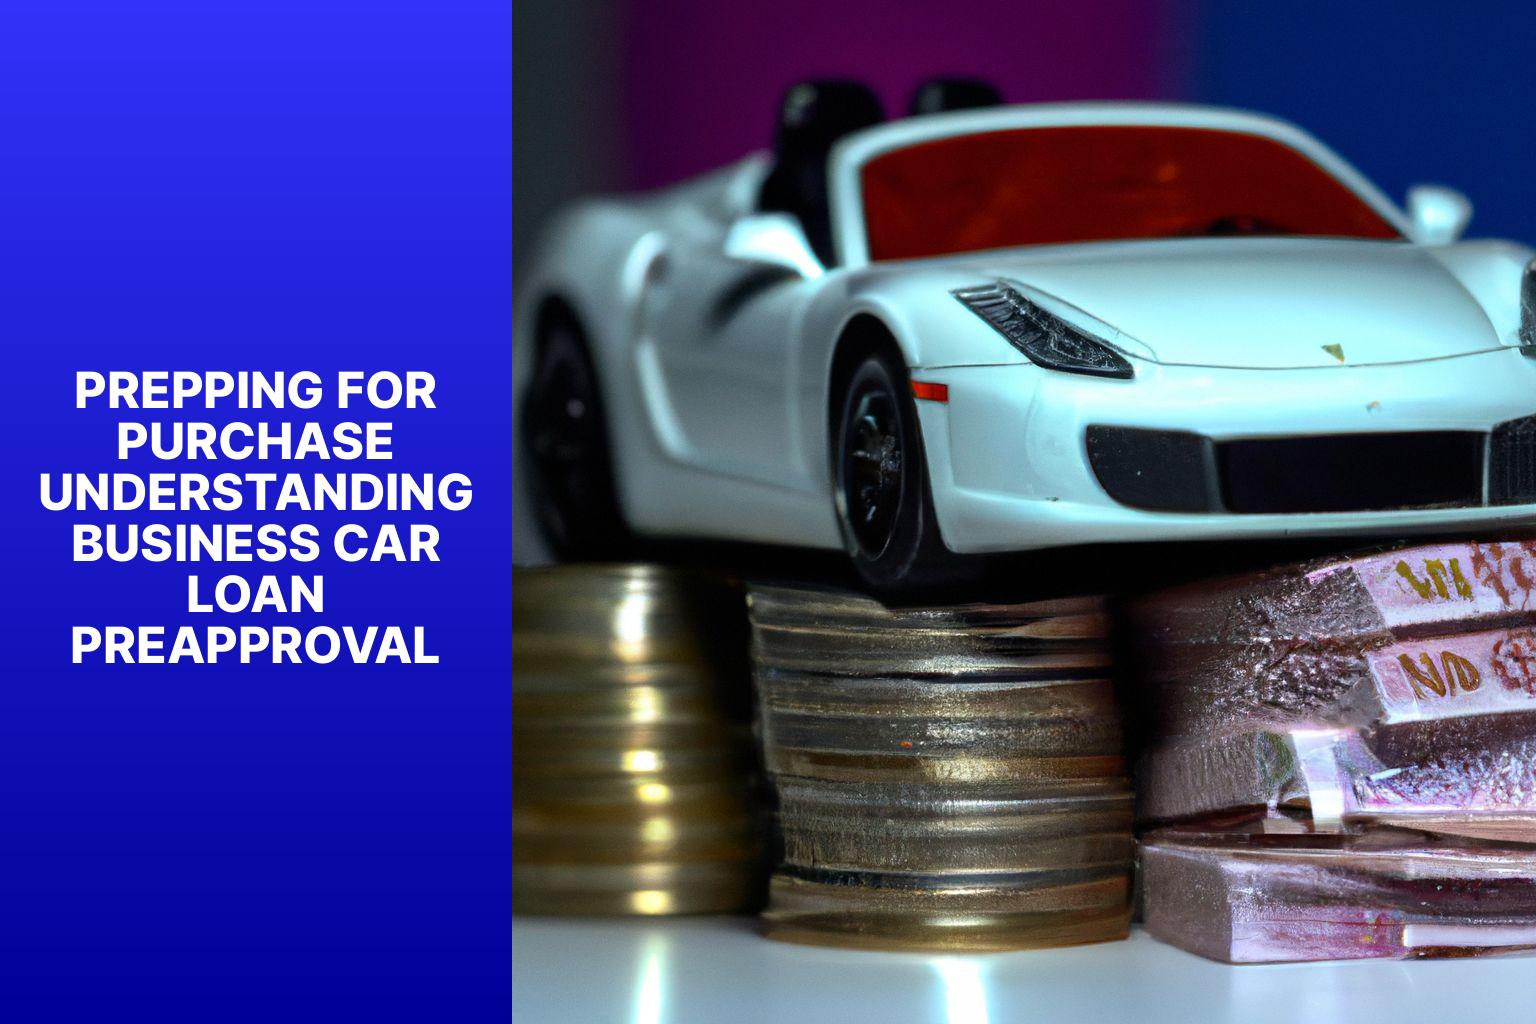 Prepping for Purchase Understanding Business Car Loan PreApproval